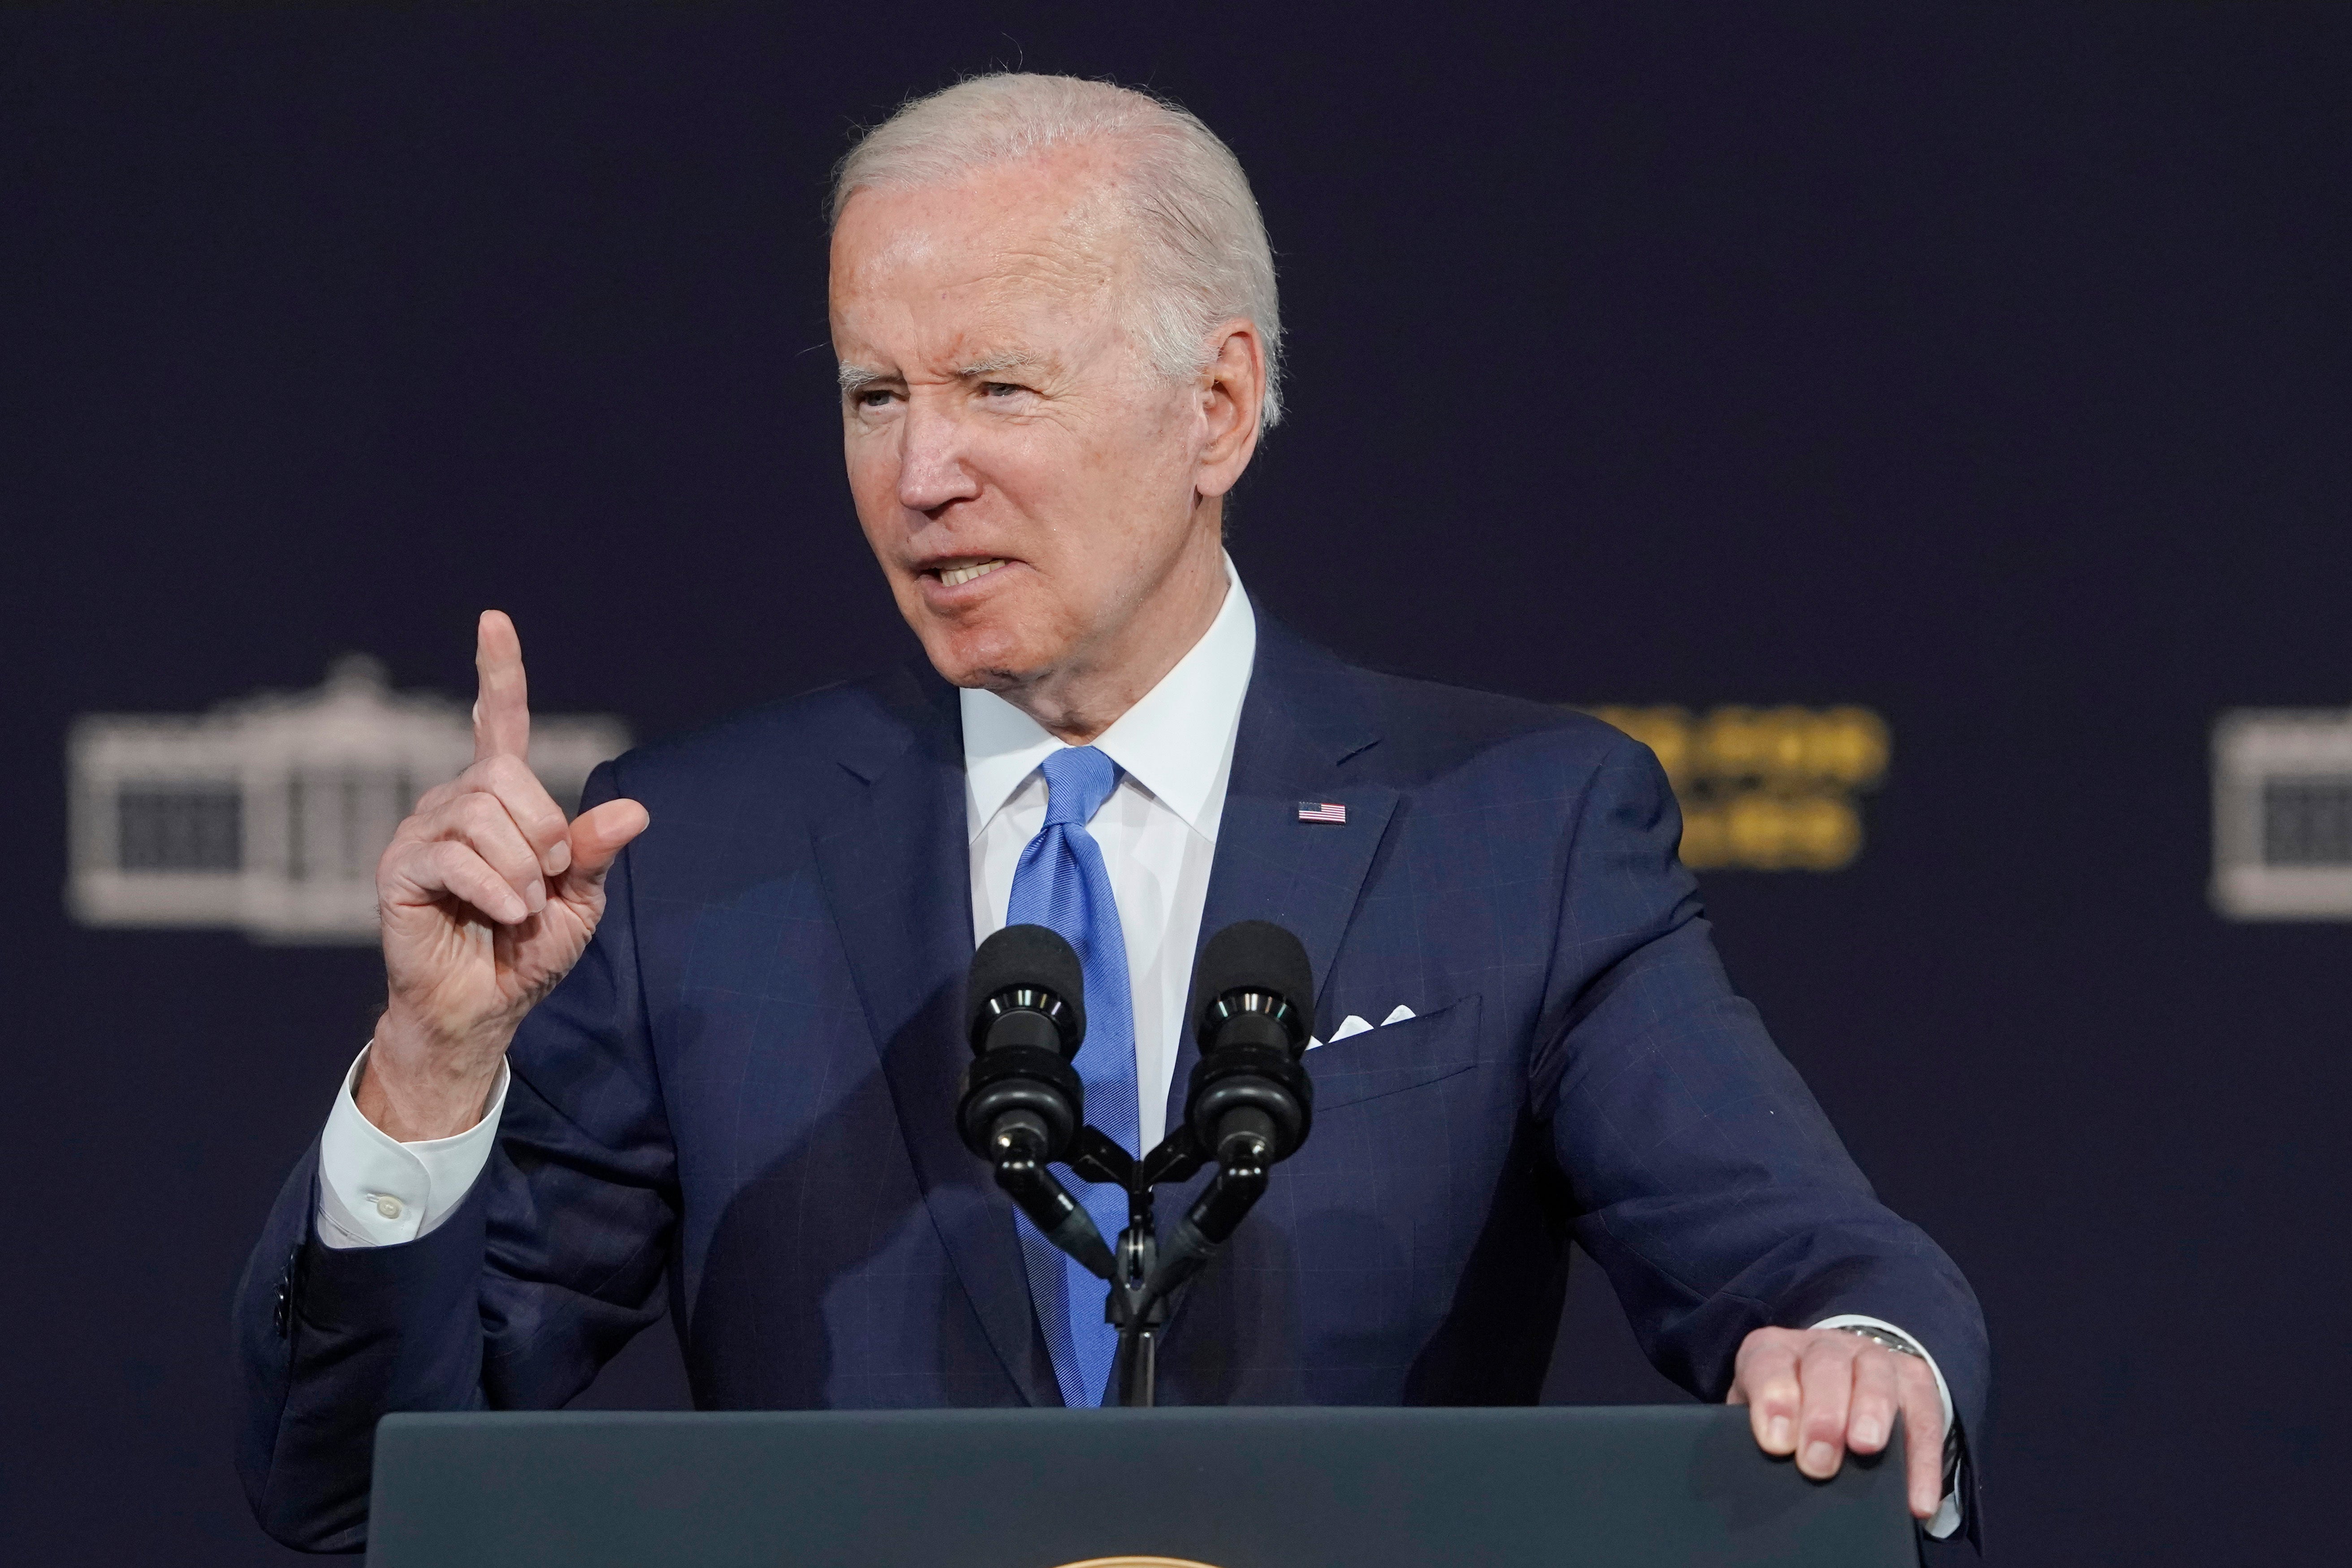 Joe Biden is yet to fulfill his campaign pledge to end the federal death penalty